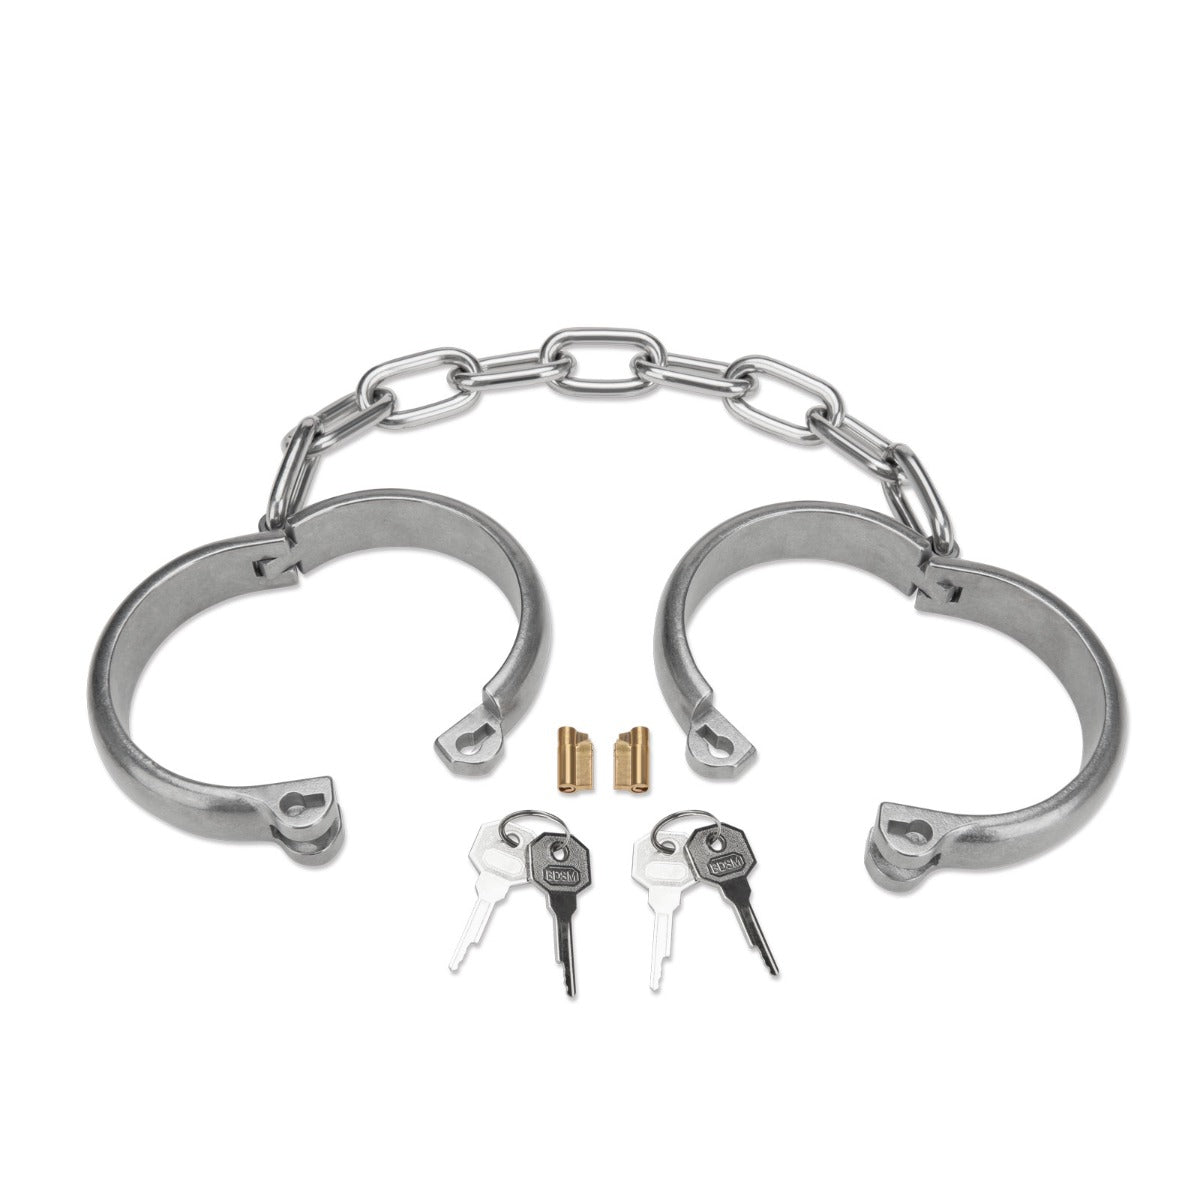 Handcuffs Prowler RED Heavy-Duty Ankle Cuffs   